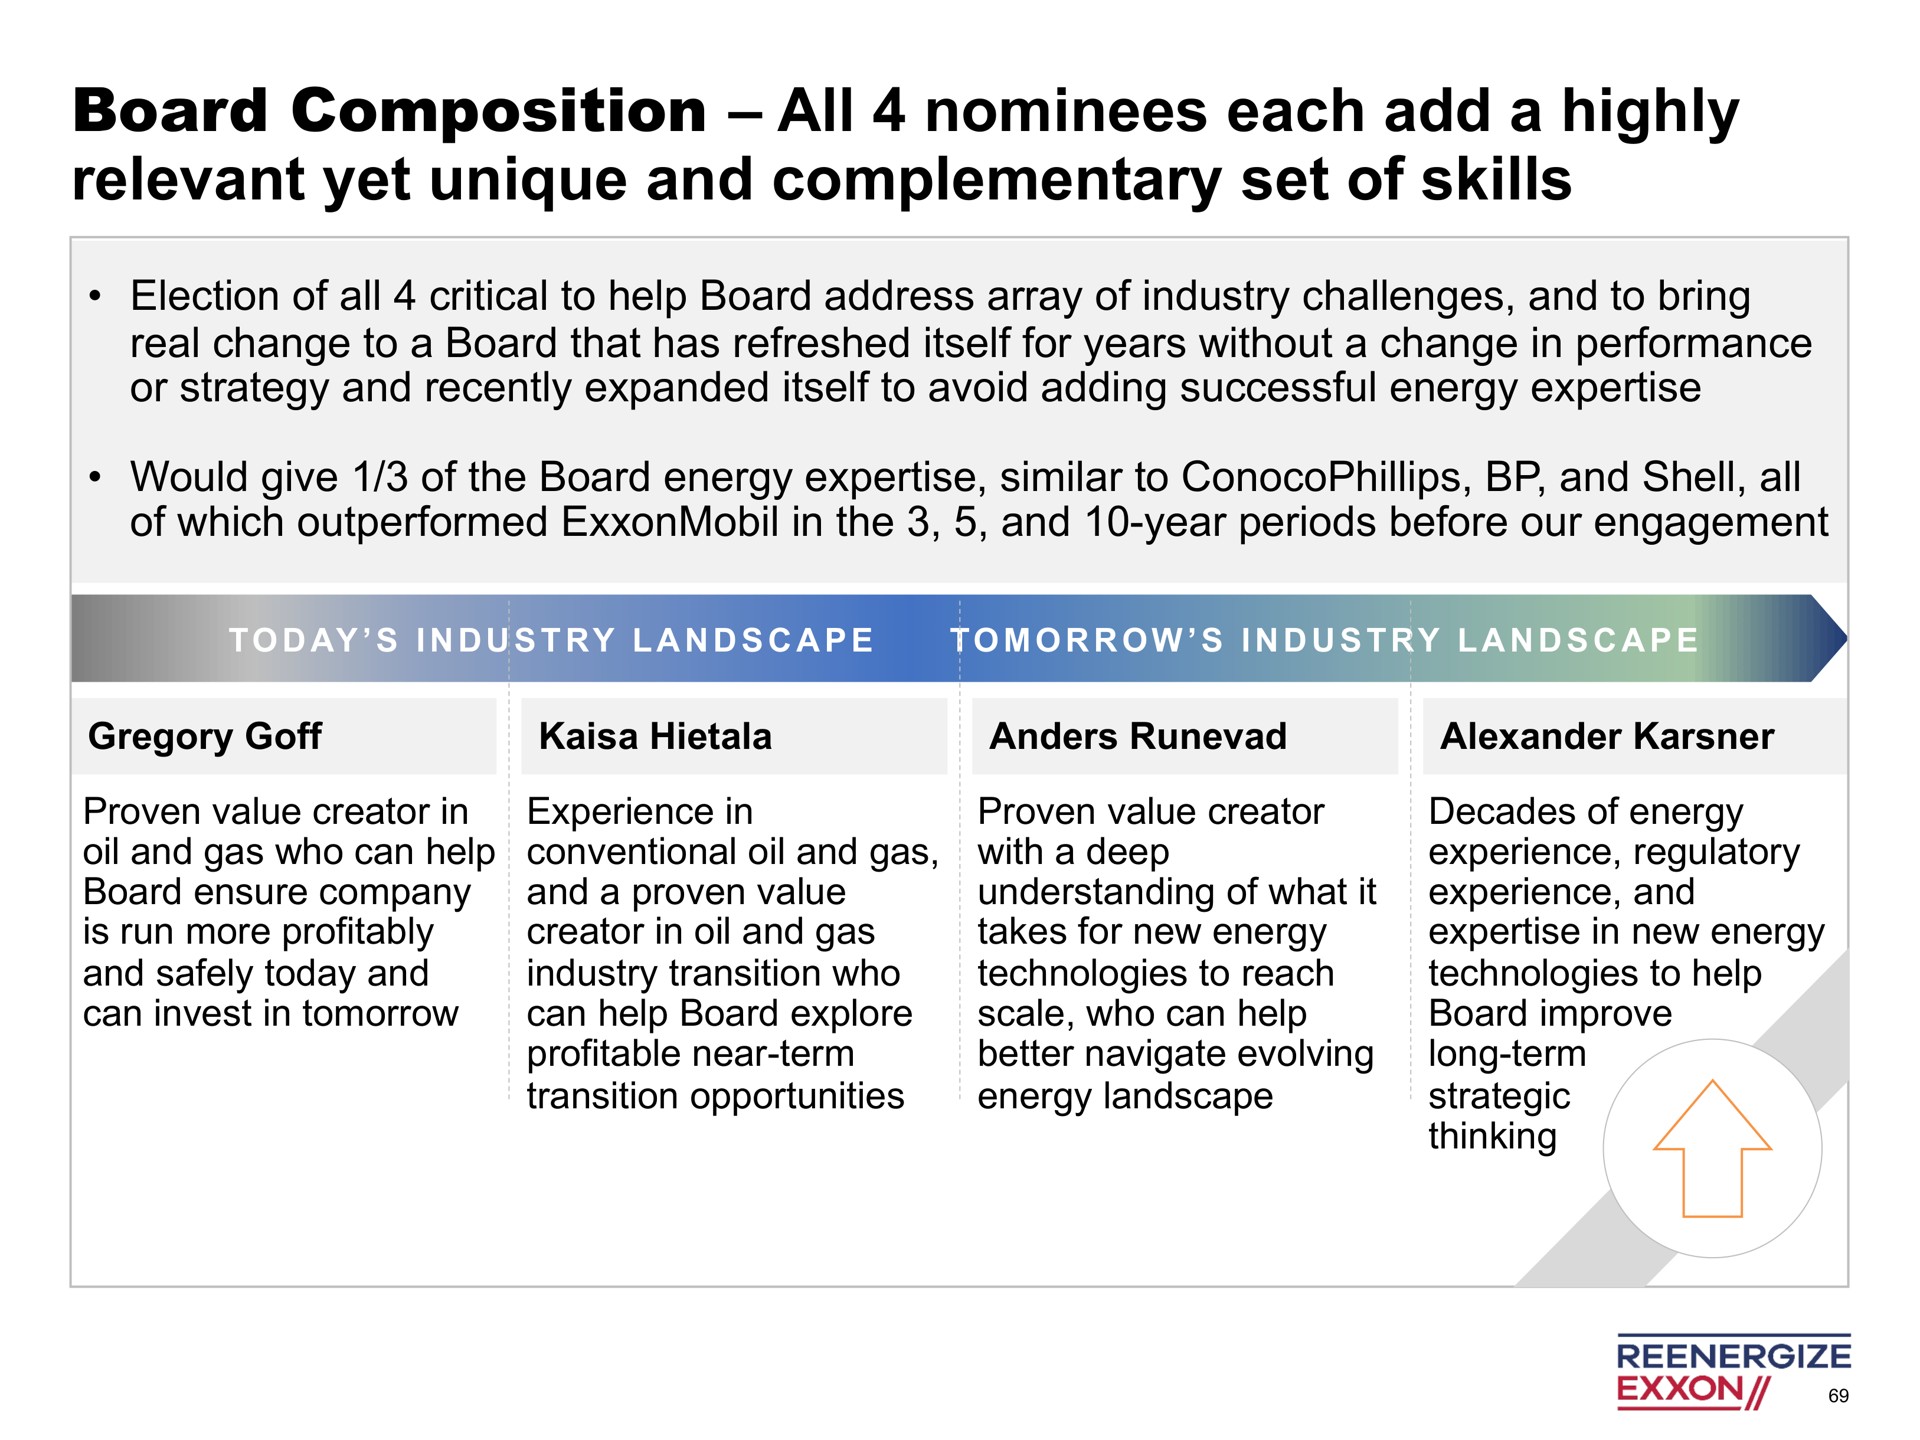 board composition all nominees each add a highly relevant yet unique and complementary set of skills | Engine No. 1